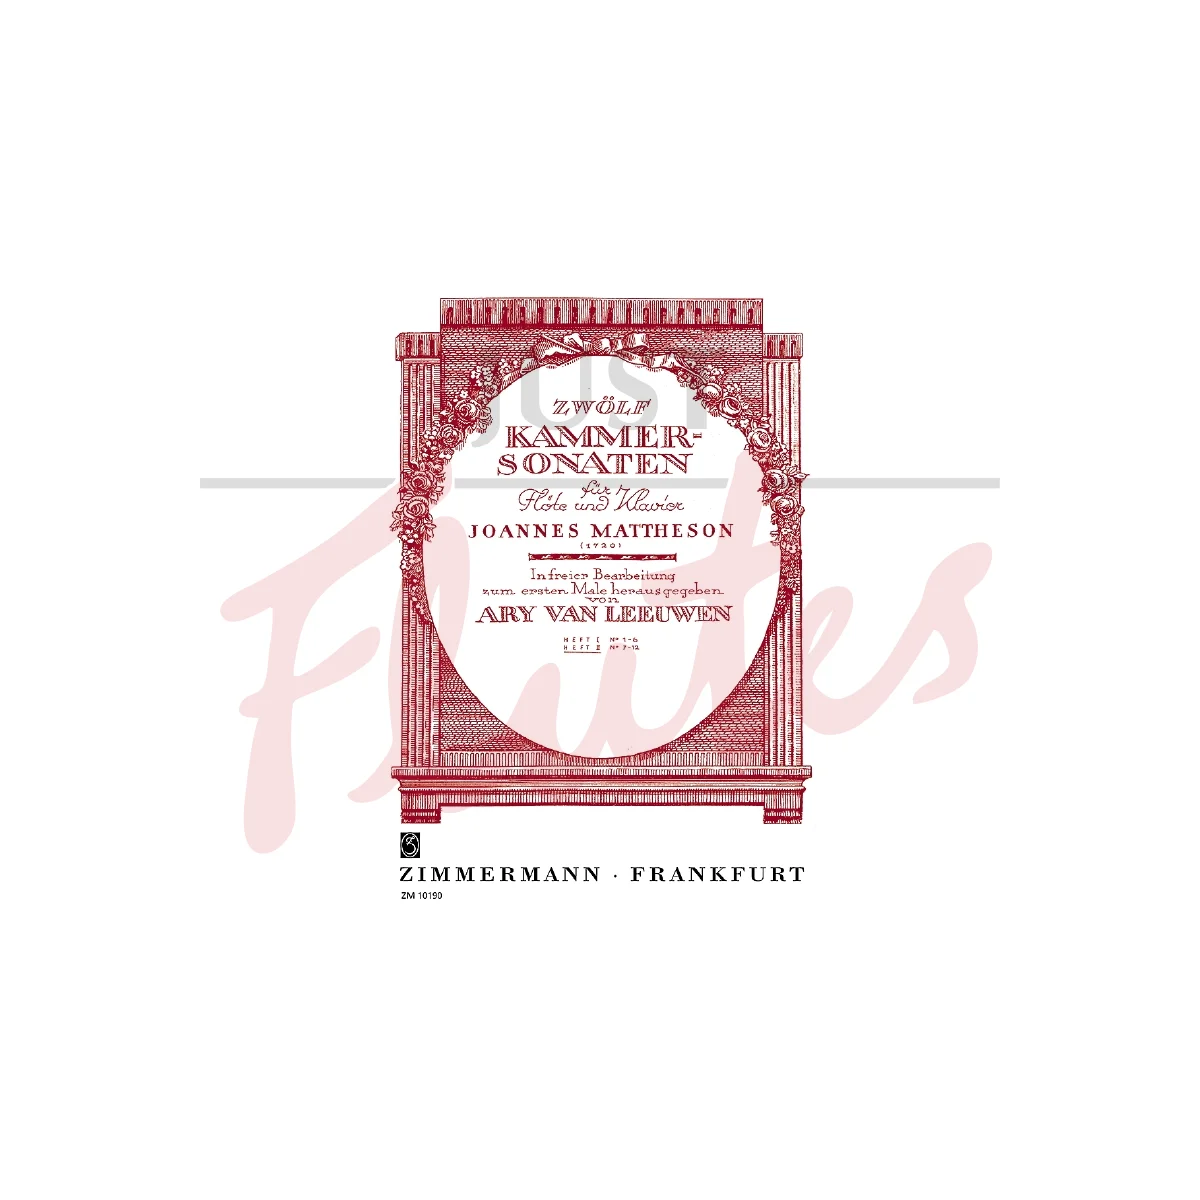 Twelve Chamber Sonatas for Flute and Piano, Book 2 No.7-12